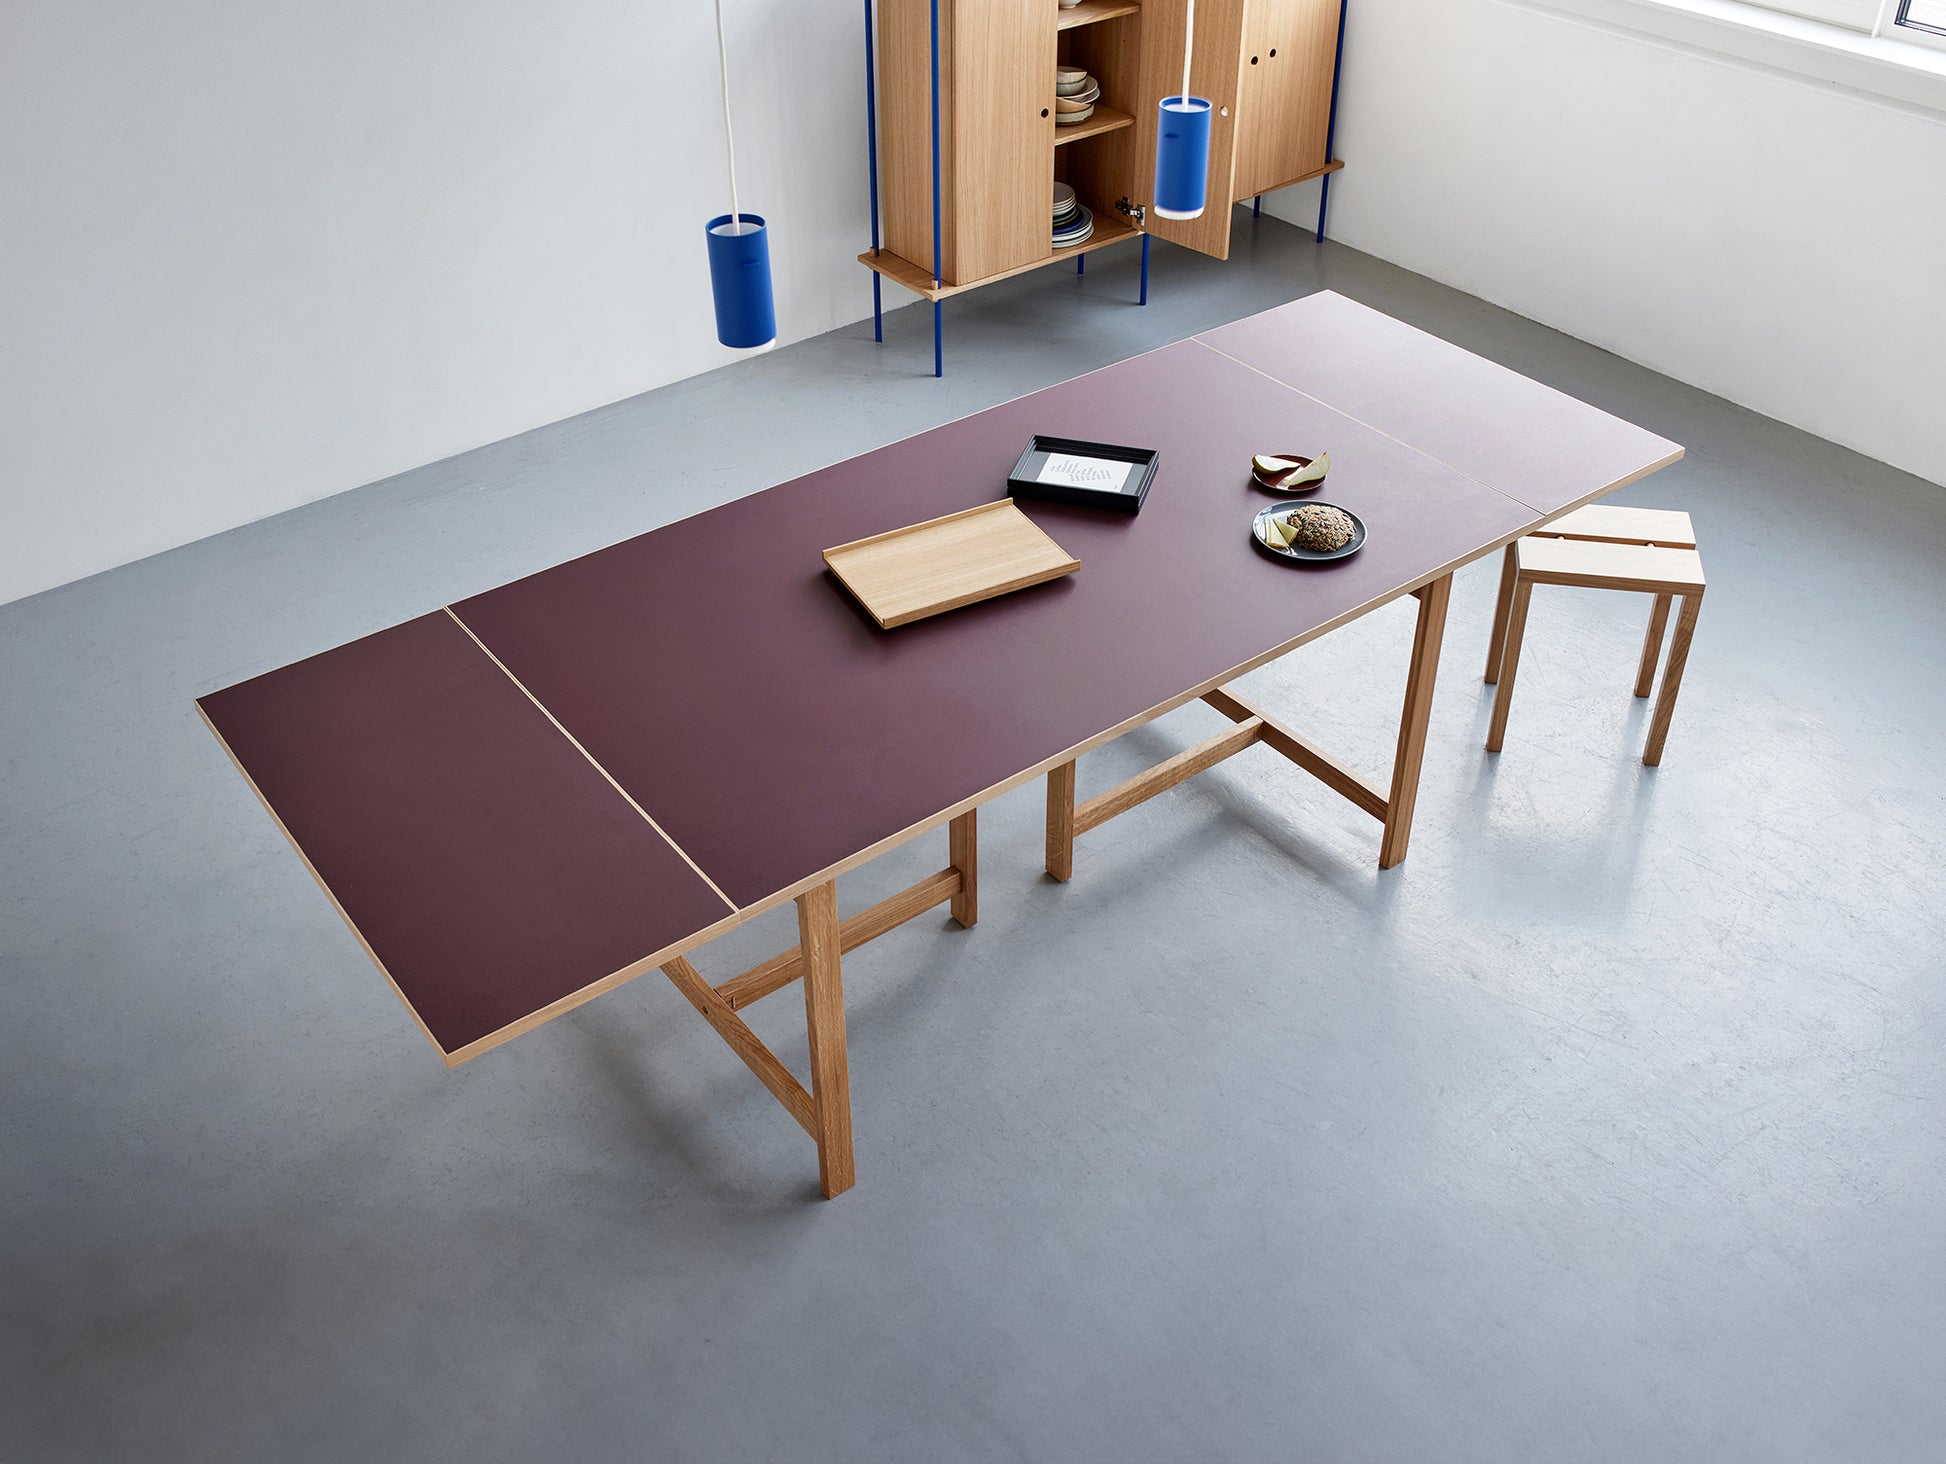 Rectangular Dining Table Extension Leaf by Moebe - Burgundy